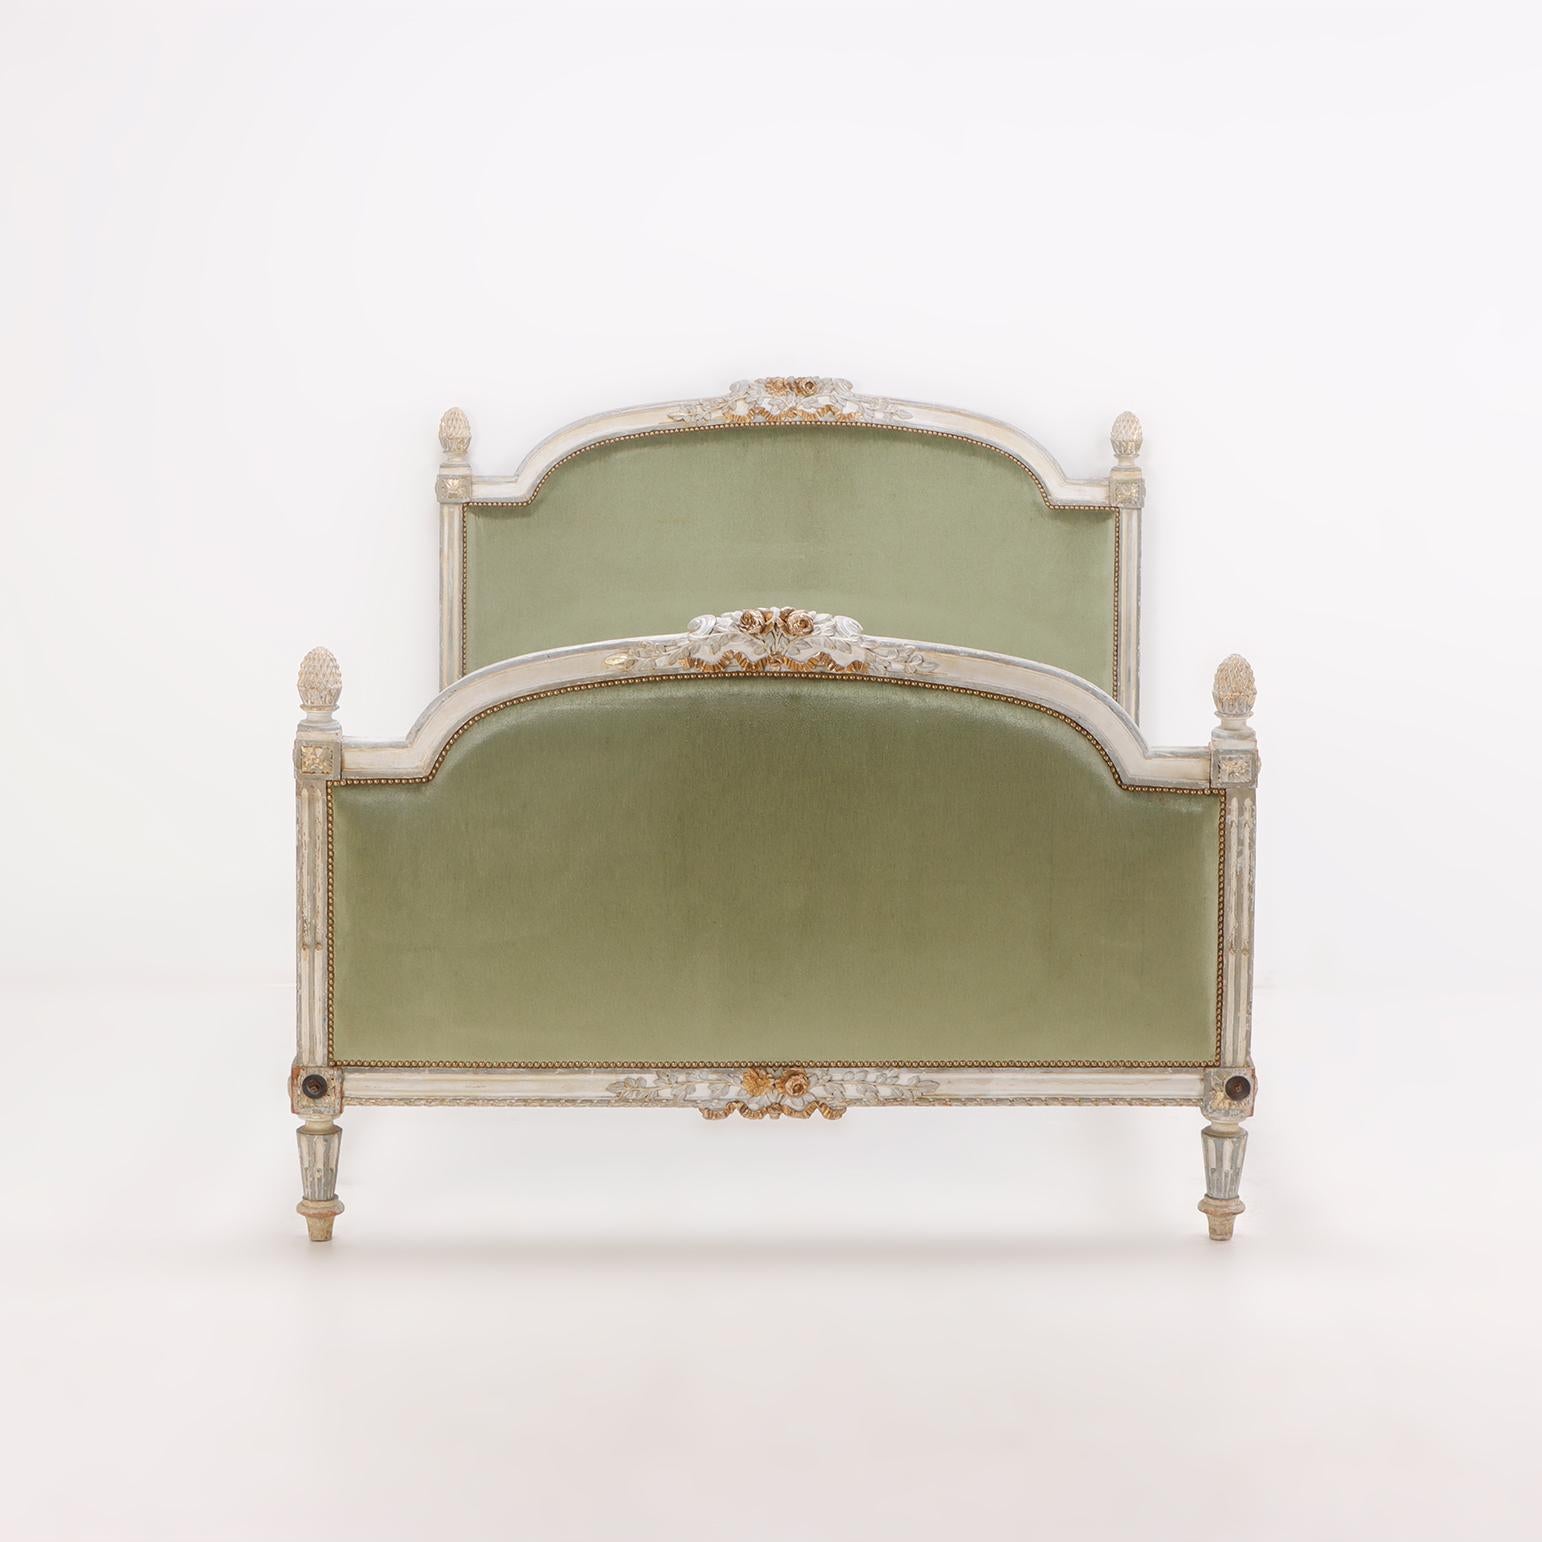 A painted and carved French Louis XV full size bed having an upholstered head and footboard, circa 1800.
Interior Dimensions: 54